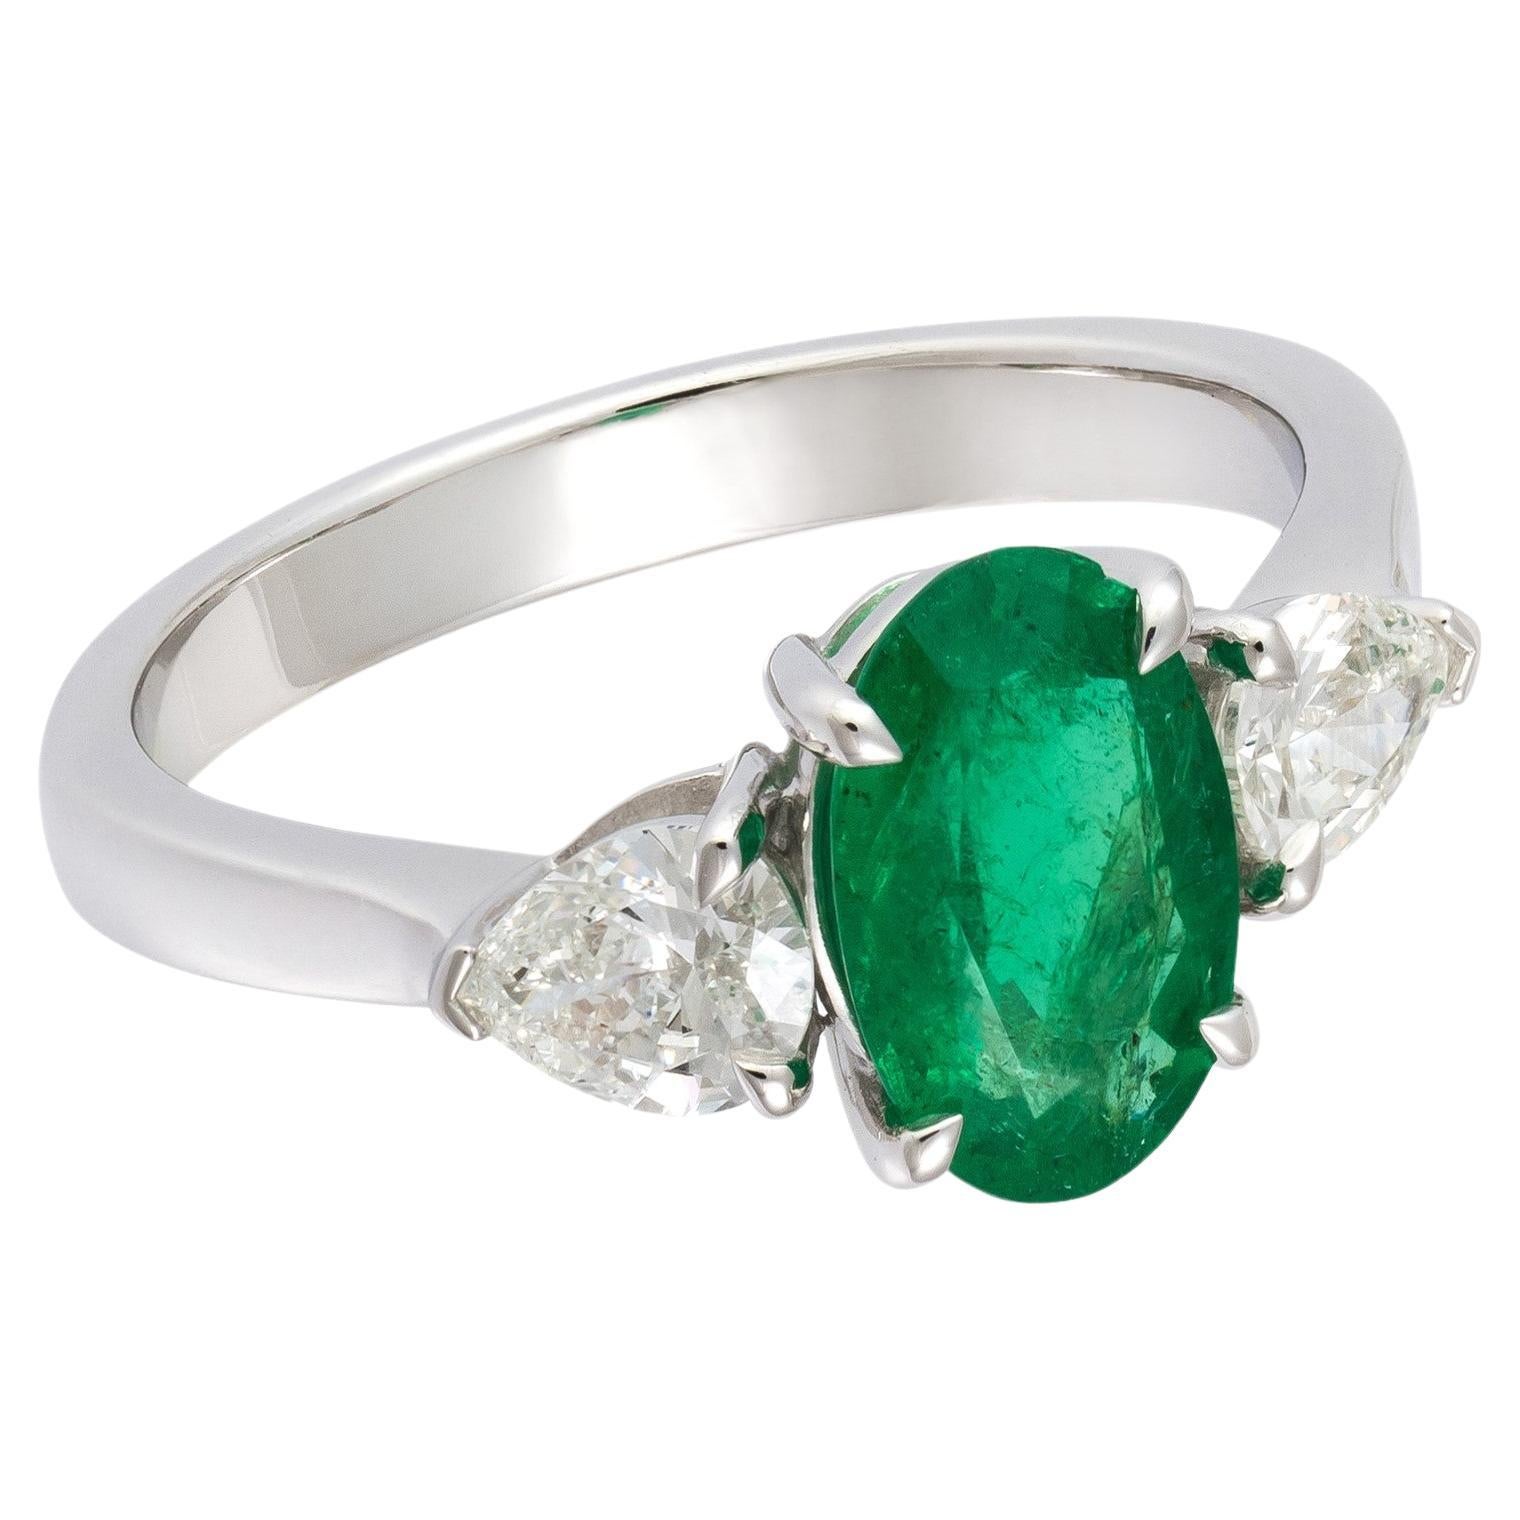 NWT $5, 500 18KT Gold Large Gorgeous Fancy Oval Emerald and Diamond Ring